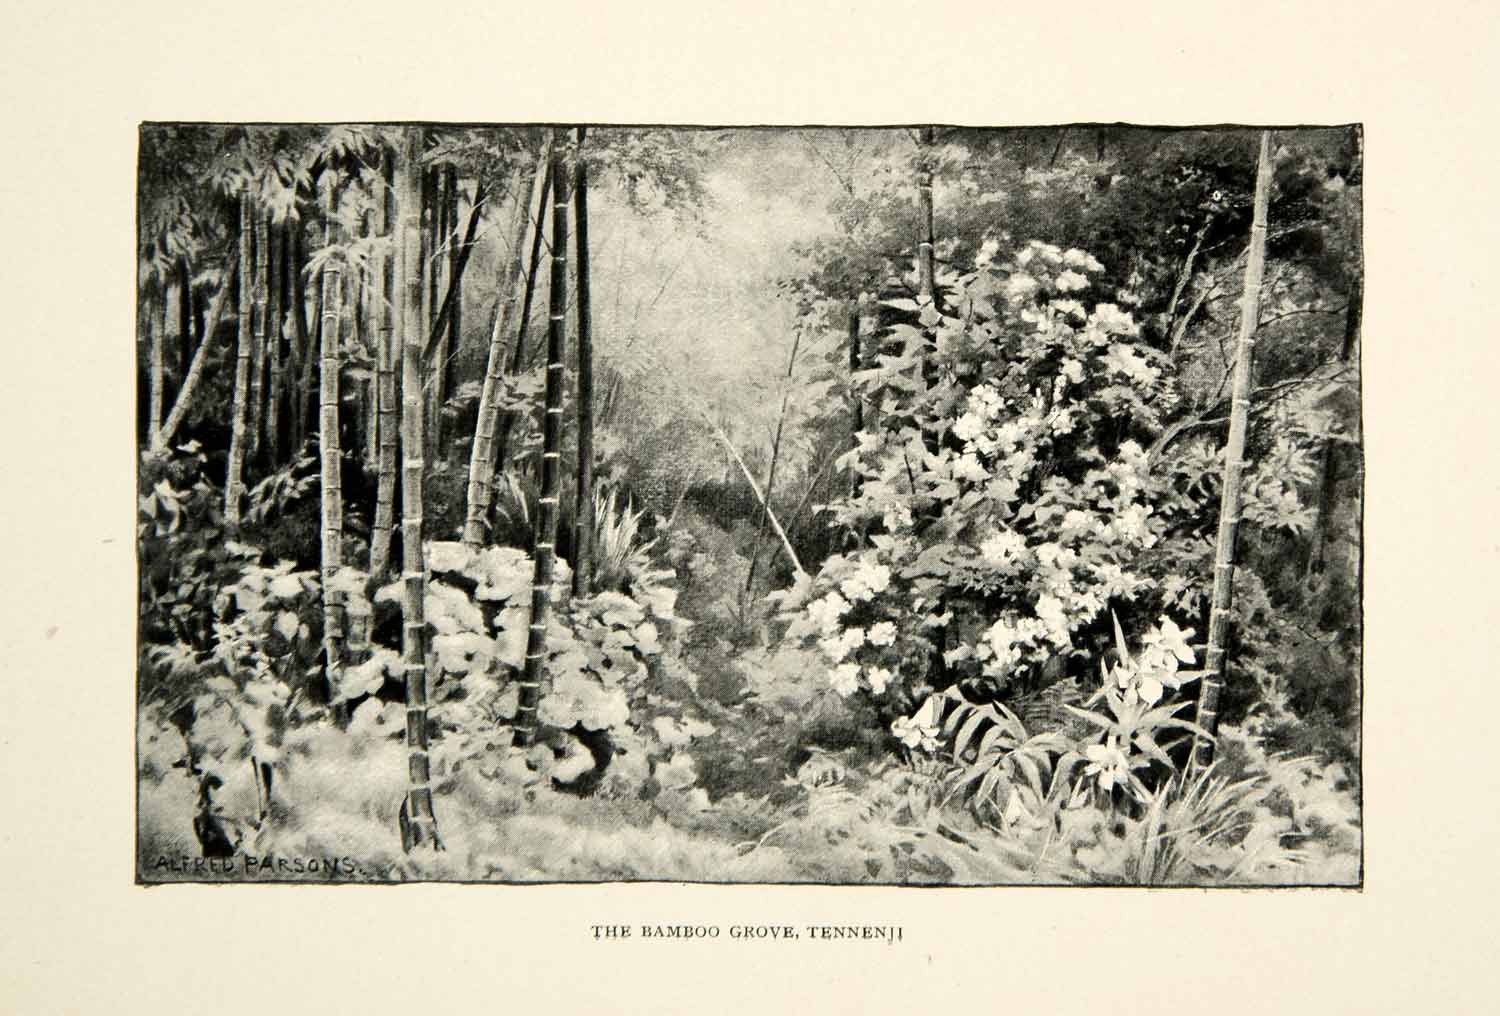 1896 Print Bamboo Grove Tennen-ji Alfred Parsons Japan Forest Asian Nature XGED1